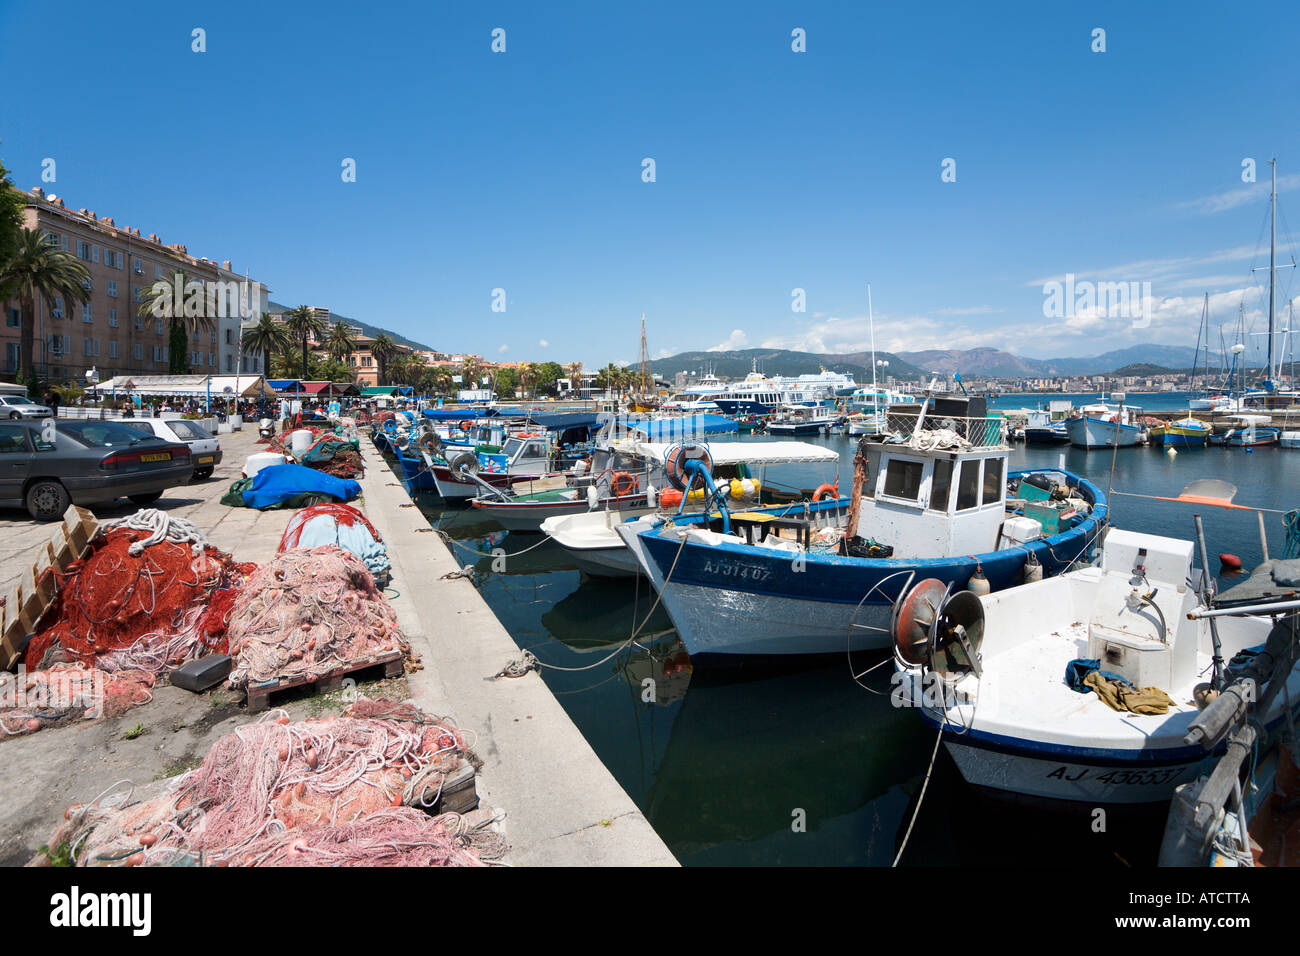 Fishing boats in the harbour at Ajaccio, Corsica, France Stock Photo